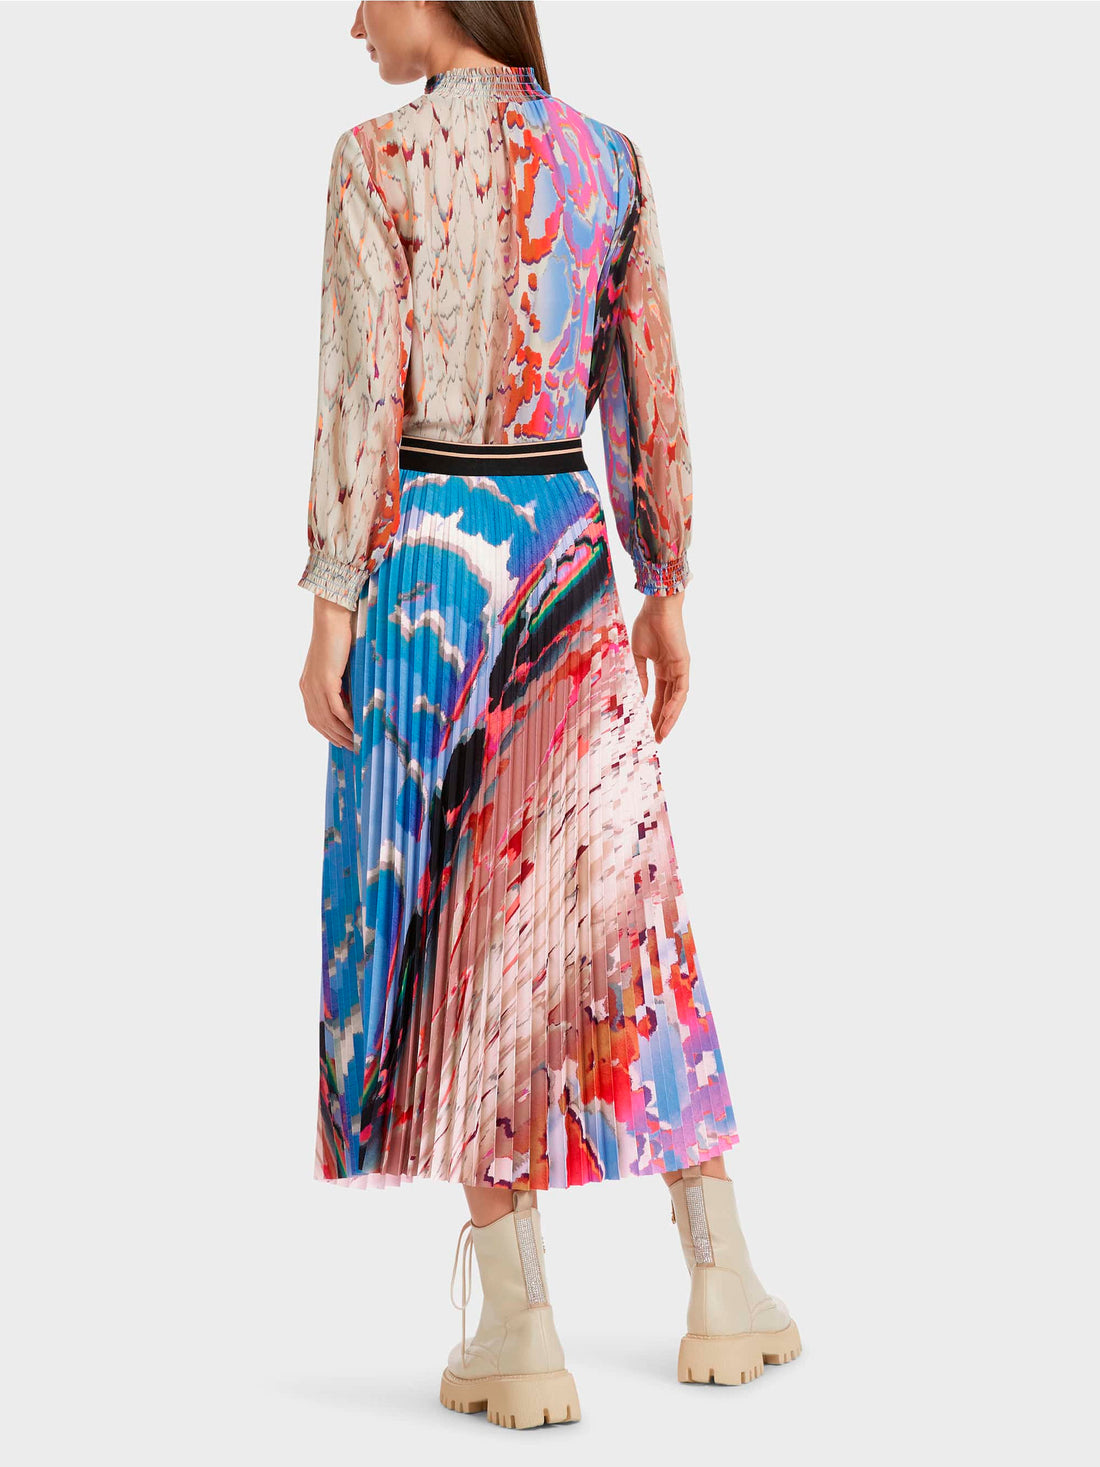 Colourful Printed Pleated Skirt_VC 71.04 W43_321_02